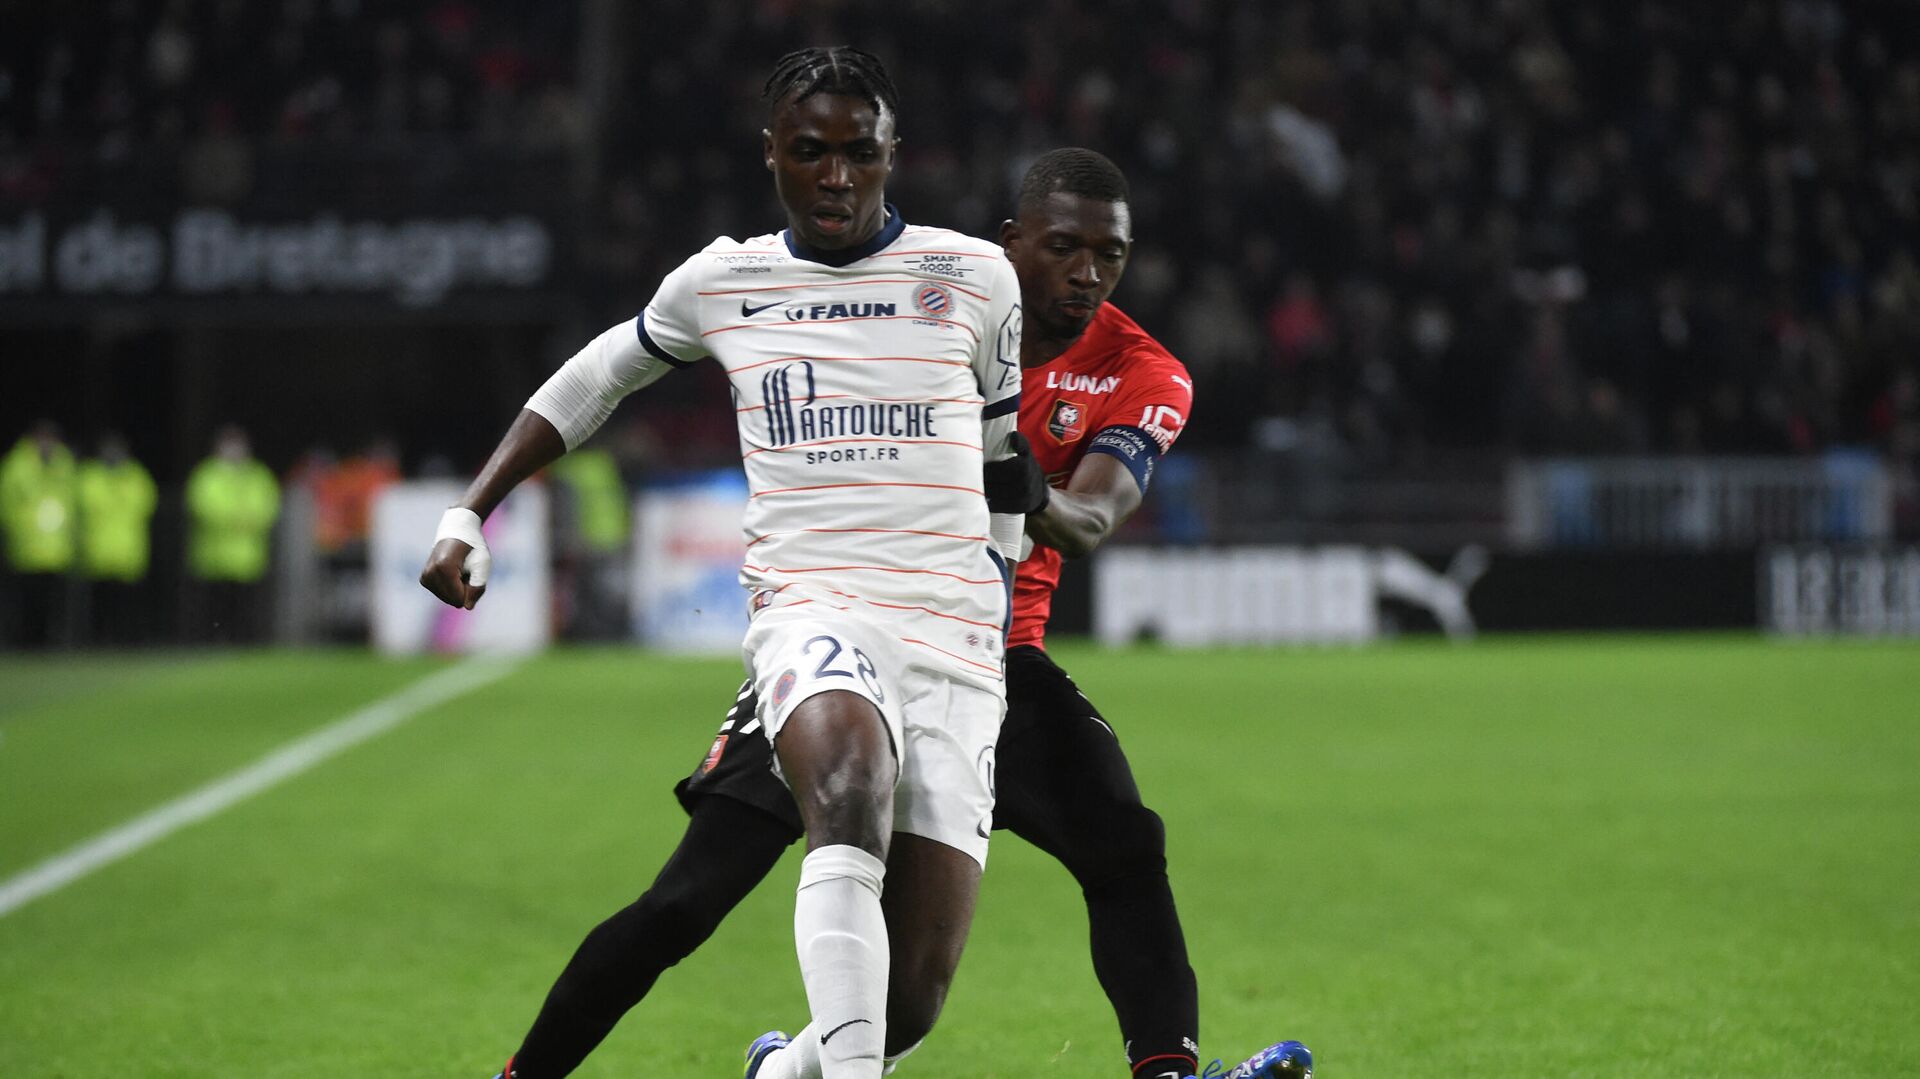 Montpellier's Congolese forward Beni Makouana (L) fights for the ball with Rennes' Malien defender Hamari Traore (R) during the French L1 football match between Stade Rennais Football Club and Montpellier Herault SC, at The Roazhon Park Stadium in Rennes, north-western France on November 20, 2021. (Photo by JEAN-FRANCOIS MONIER / AFP) - РИА Новости, 1920, 21.11.2021